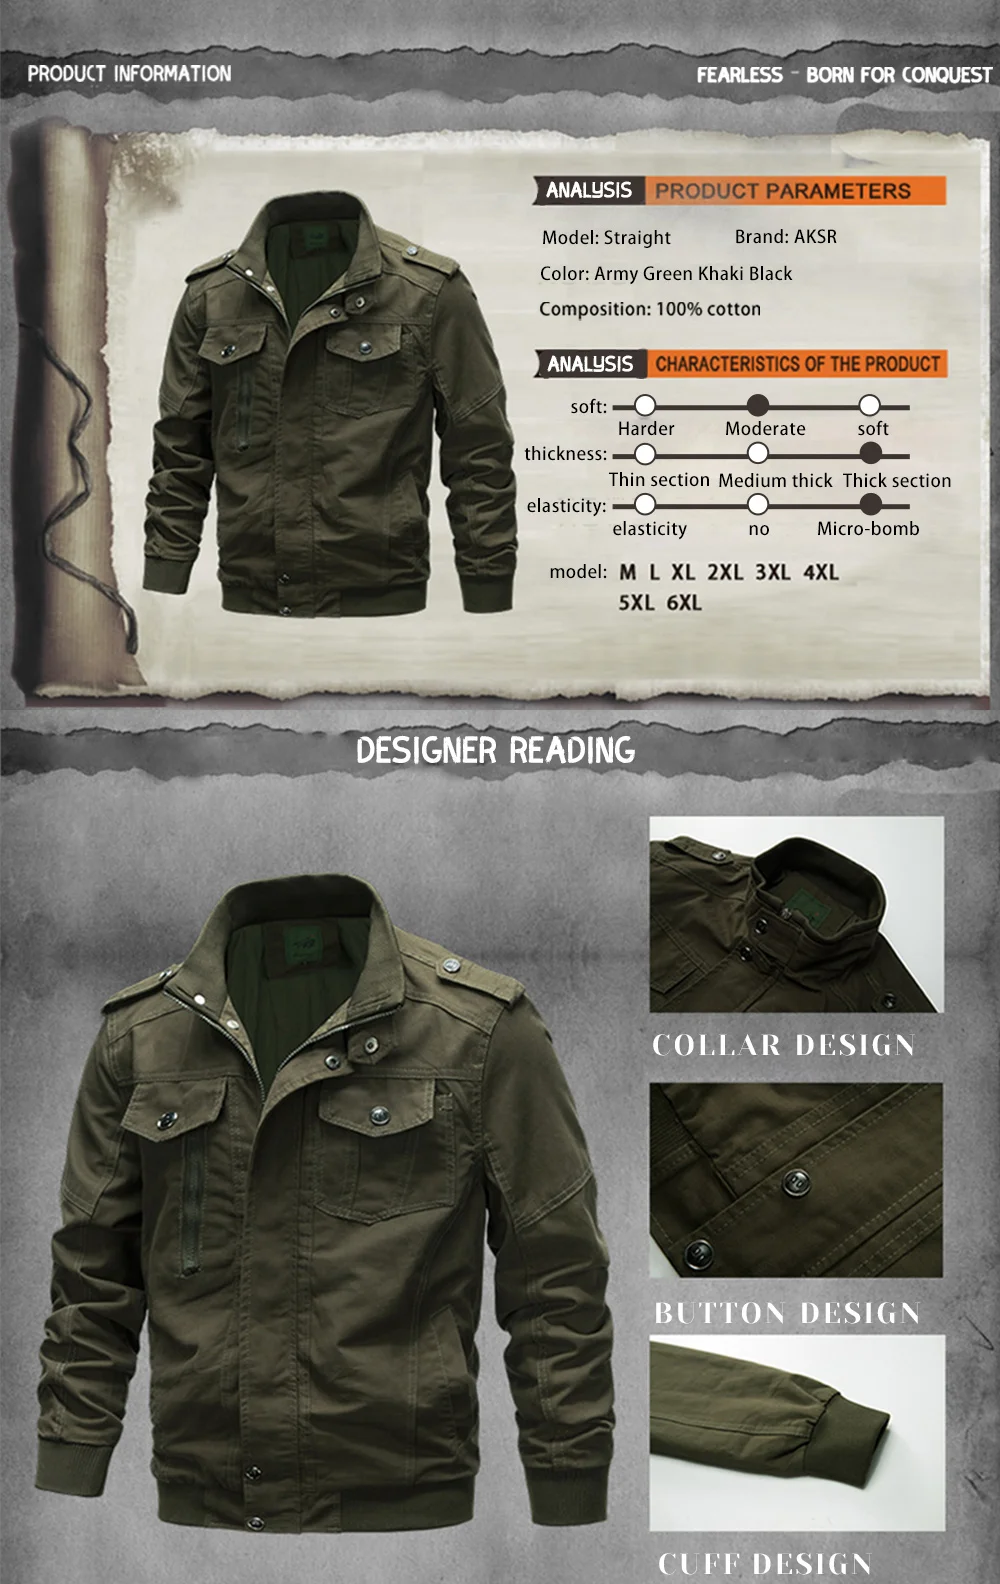 AKSR 2019 Mens Autumn Winter Jackets Coats Stand Collar Cotton Outerwear Military Jacket Male Brand Clothing Plus Size